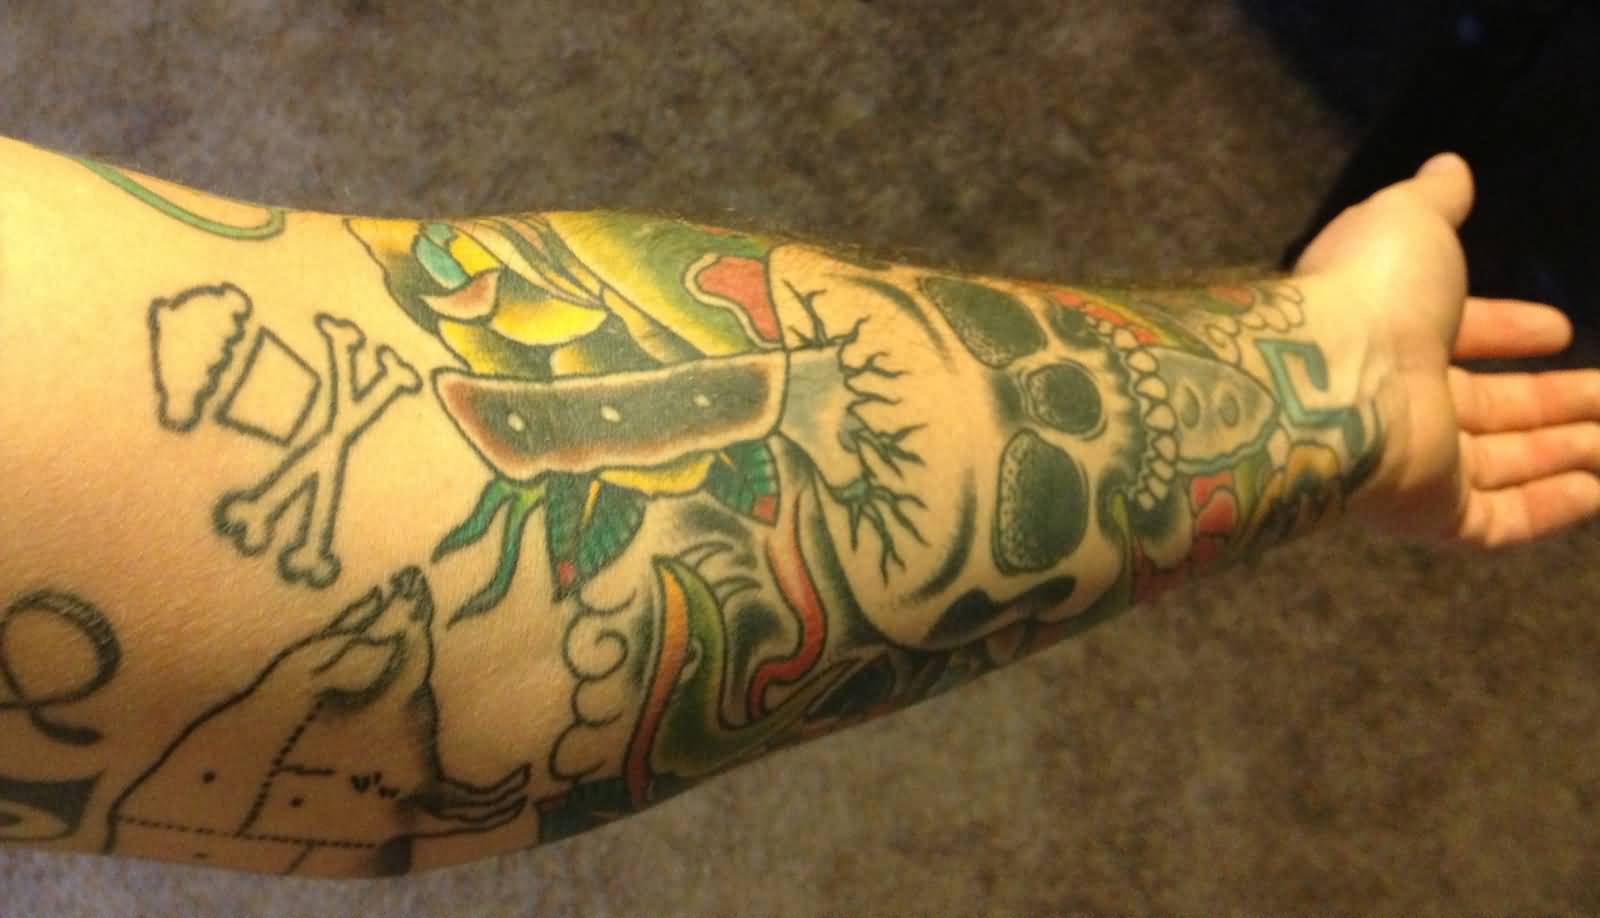 Awesome Chef Knife Ripped Skull And Other Stuff Tattoo On Forearm